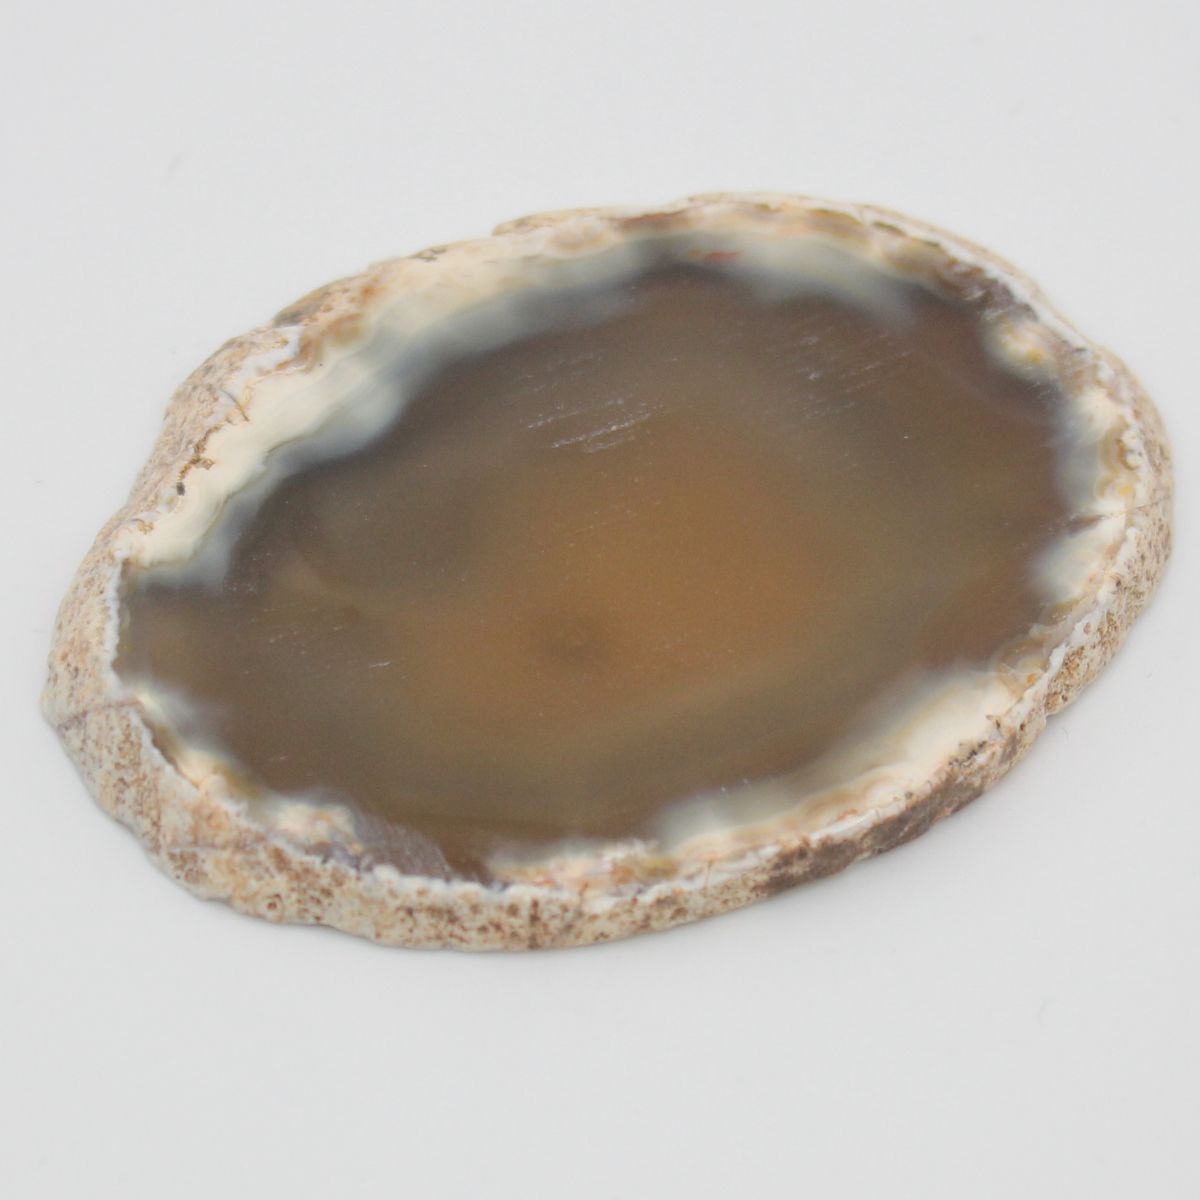 Stone/Mineral Laminated Agate Light Brown 6-10cm